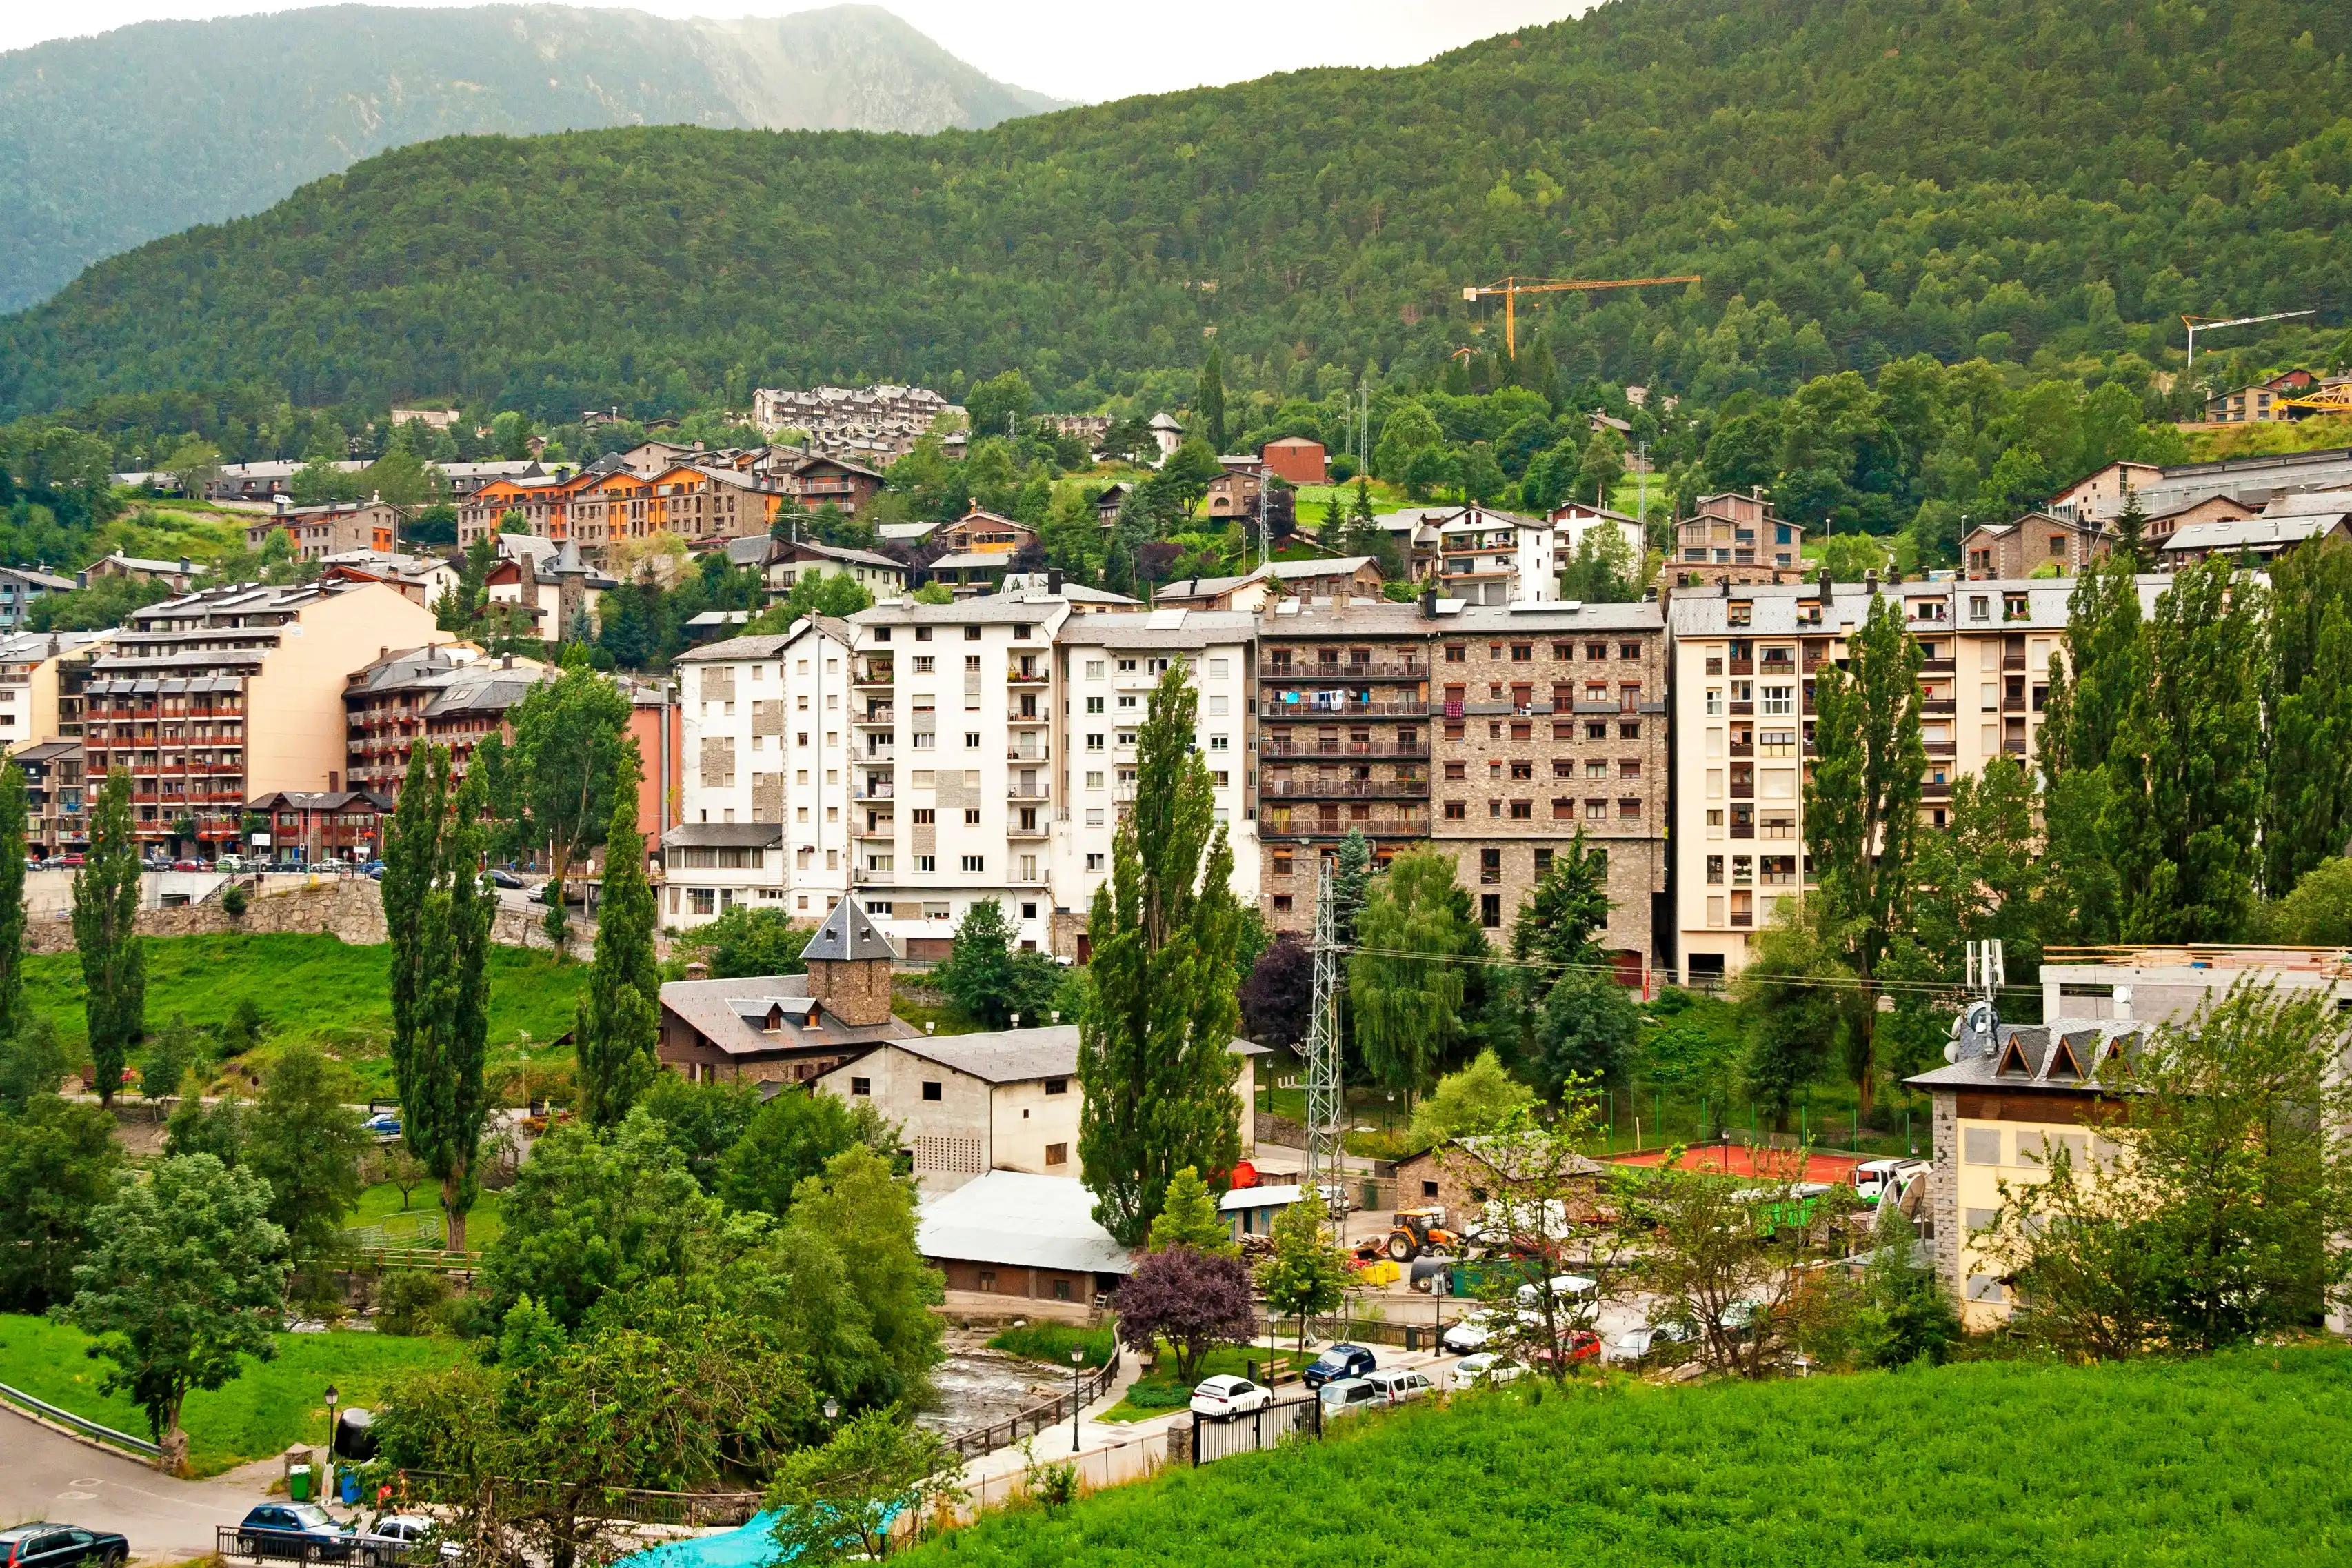 Andorra - La Massana - The general view of La Massana's downtown residential quarters in the narrow green Arinsal valley of Pyrenees mountains, the famous ski and summer resort